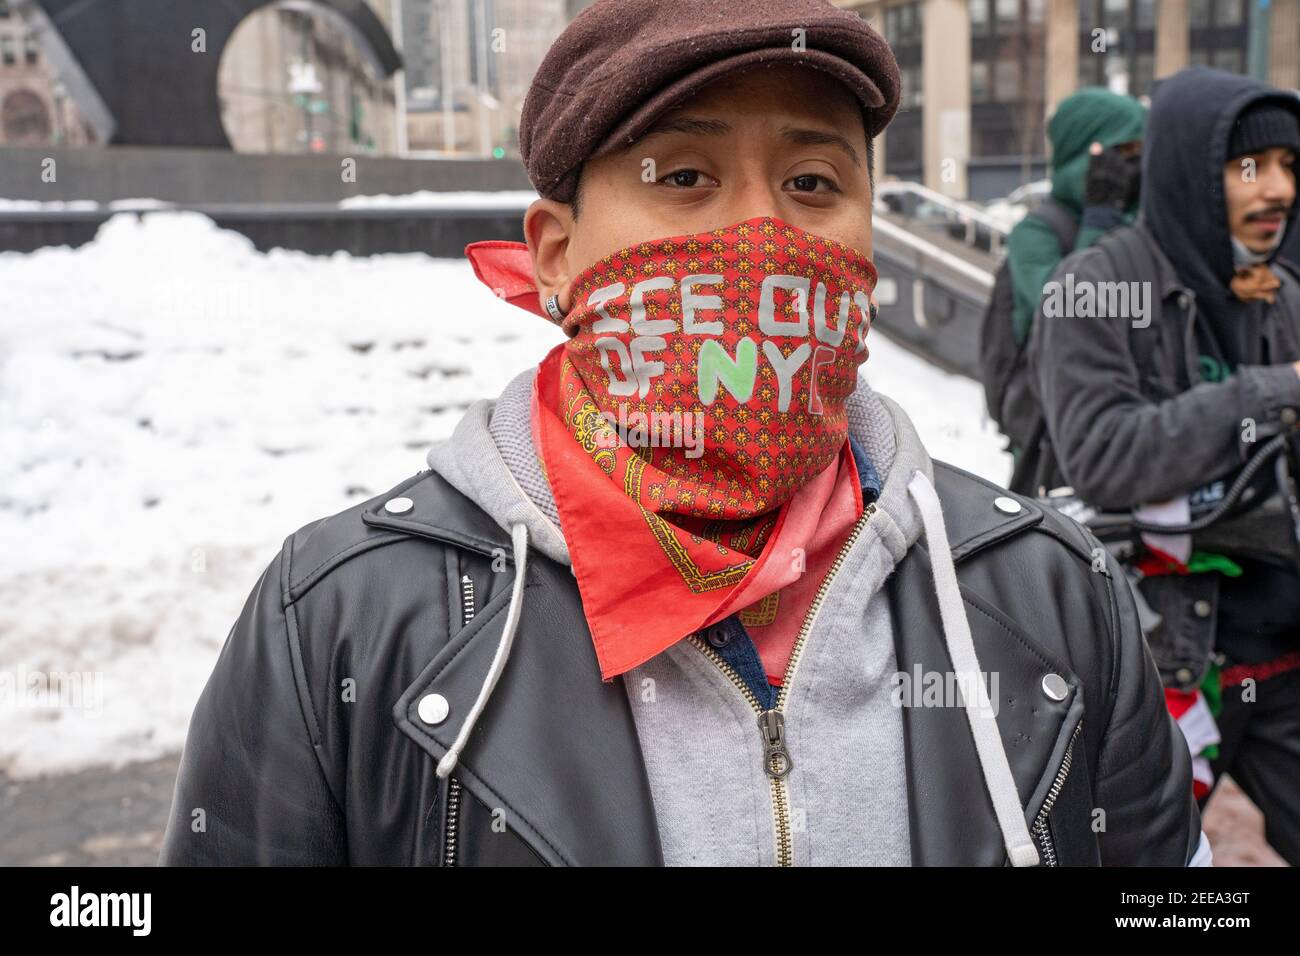 NEW YORK, NY - FEBRUARY 15: A protester ware an ICE out of NYC bandana at Foley Square during an Abolish ICE (Immigration and Customs Enforcement) protest on February 15, 2021 in New York City.   Free Them All by Abolish ICE Coalition marched for Javier Castillo Maradiaga through downtown New York City. Mr. Maradiaga, a 27-year-old Bronx man who has lived in the U.S. since he was 7 years old was set to be deported by the U.S. Immigration and Customs Enforcement (ICE). Stock Photo